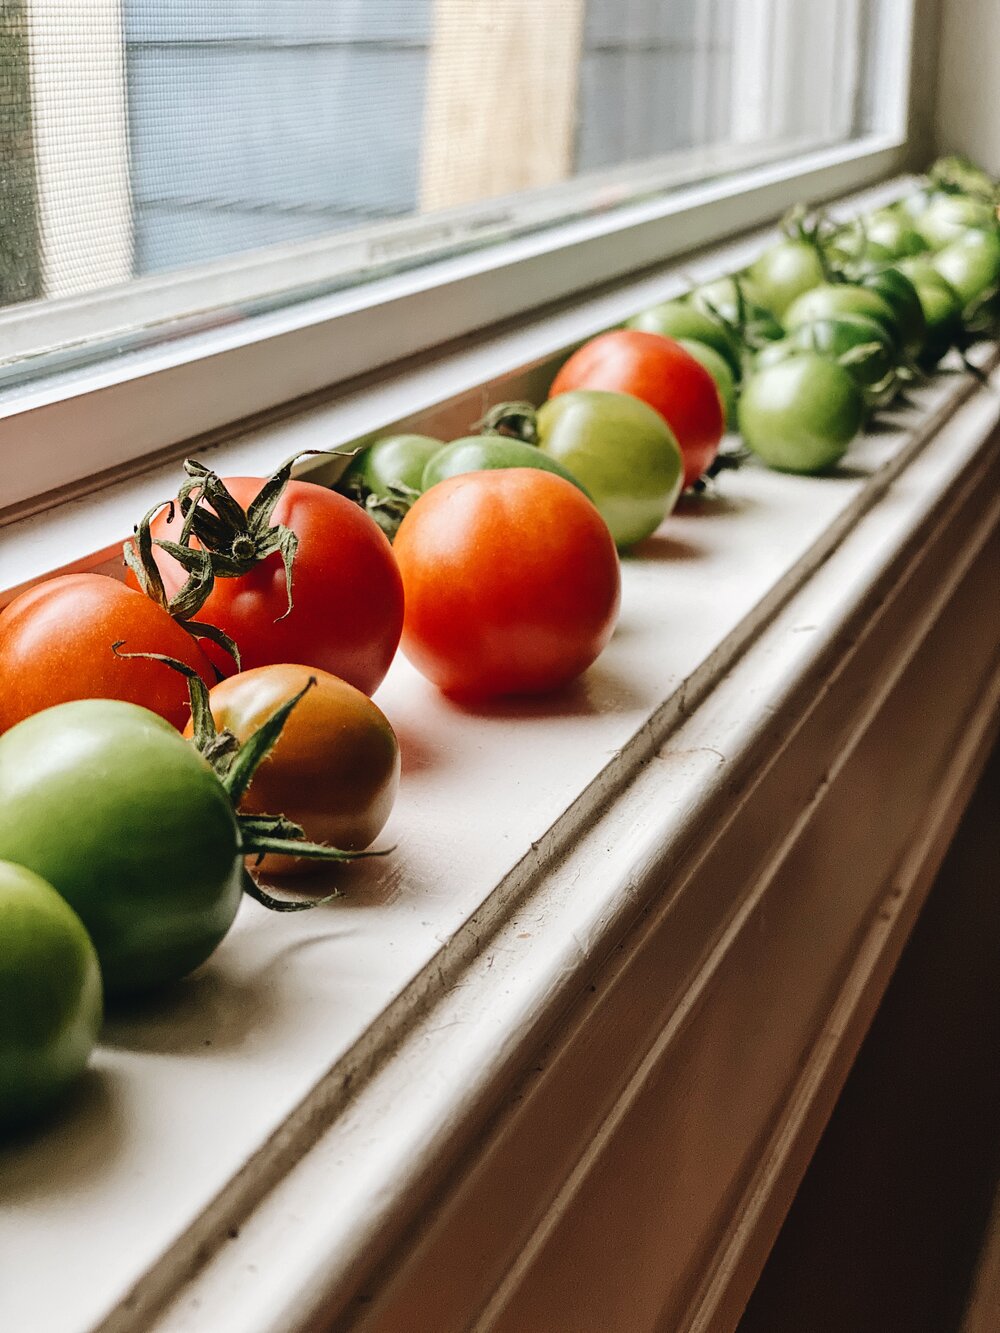 Ripening tomatoes in the window